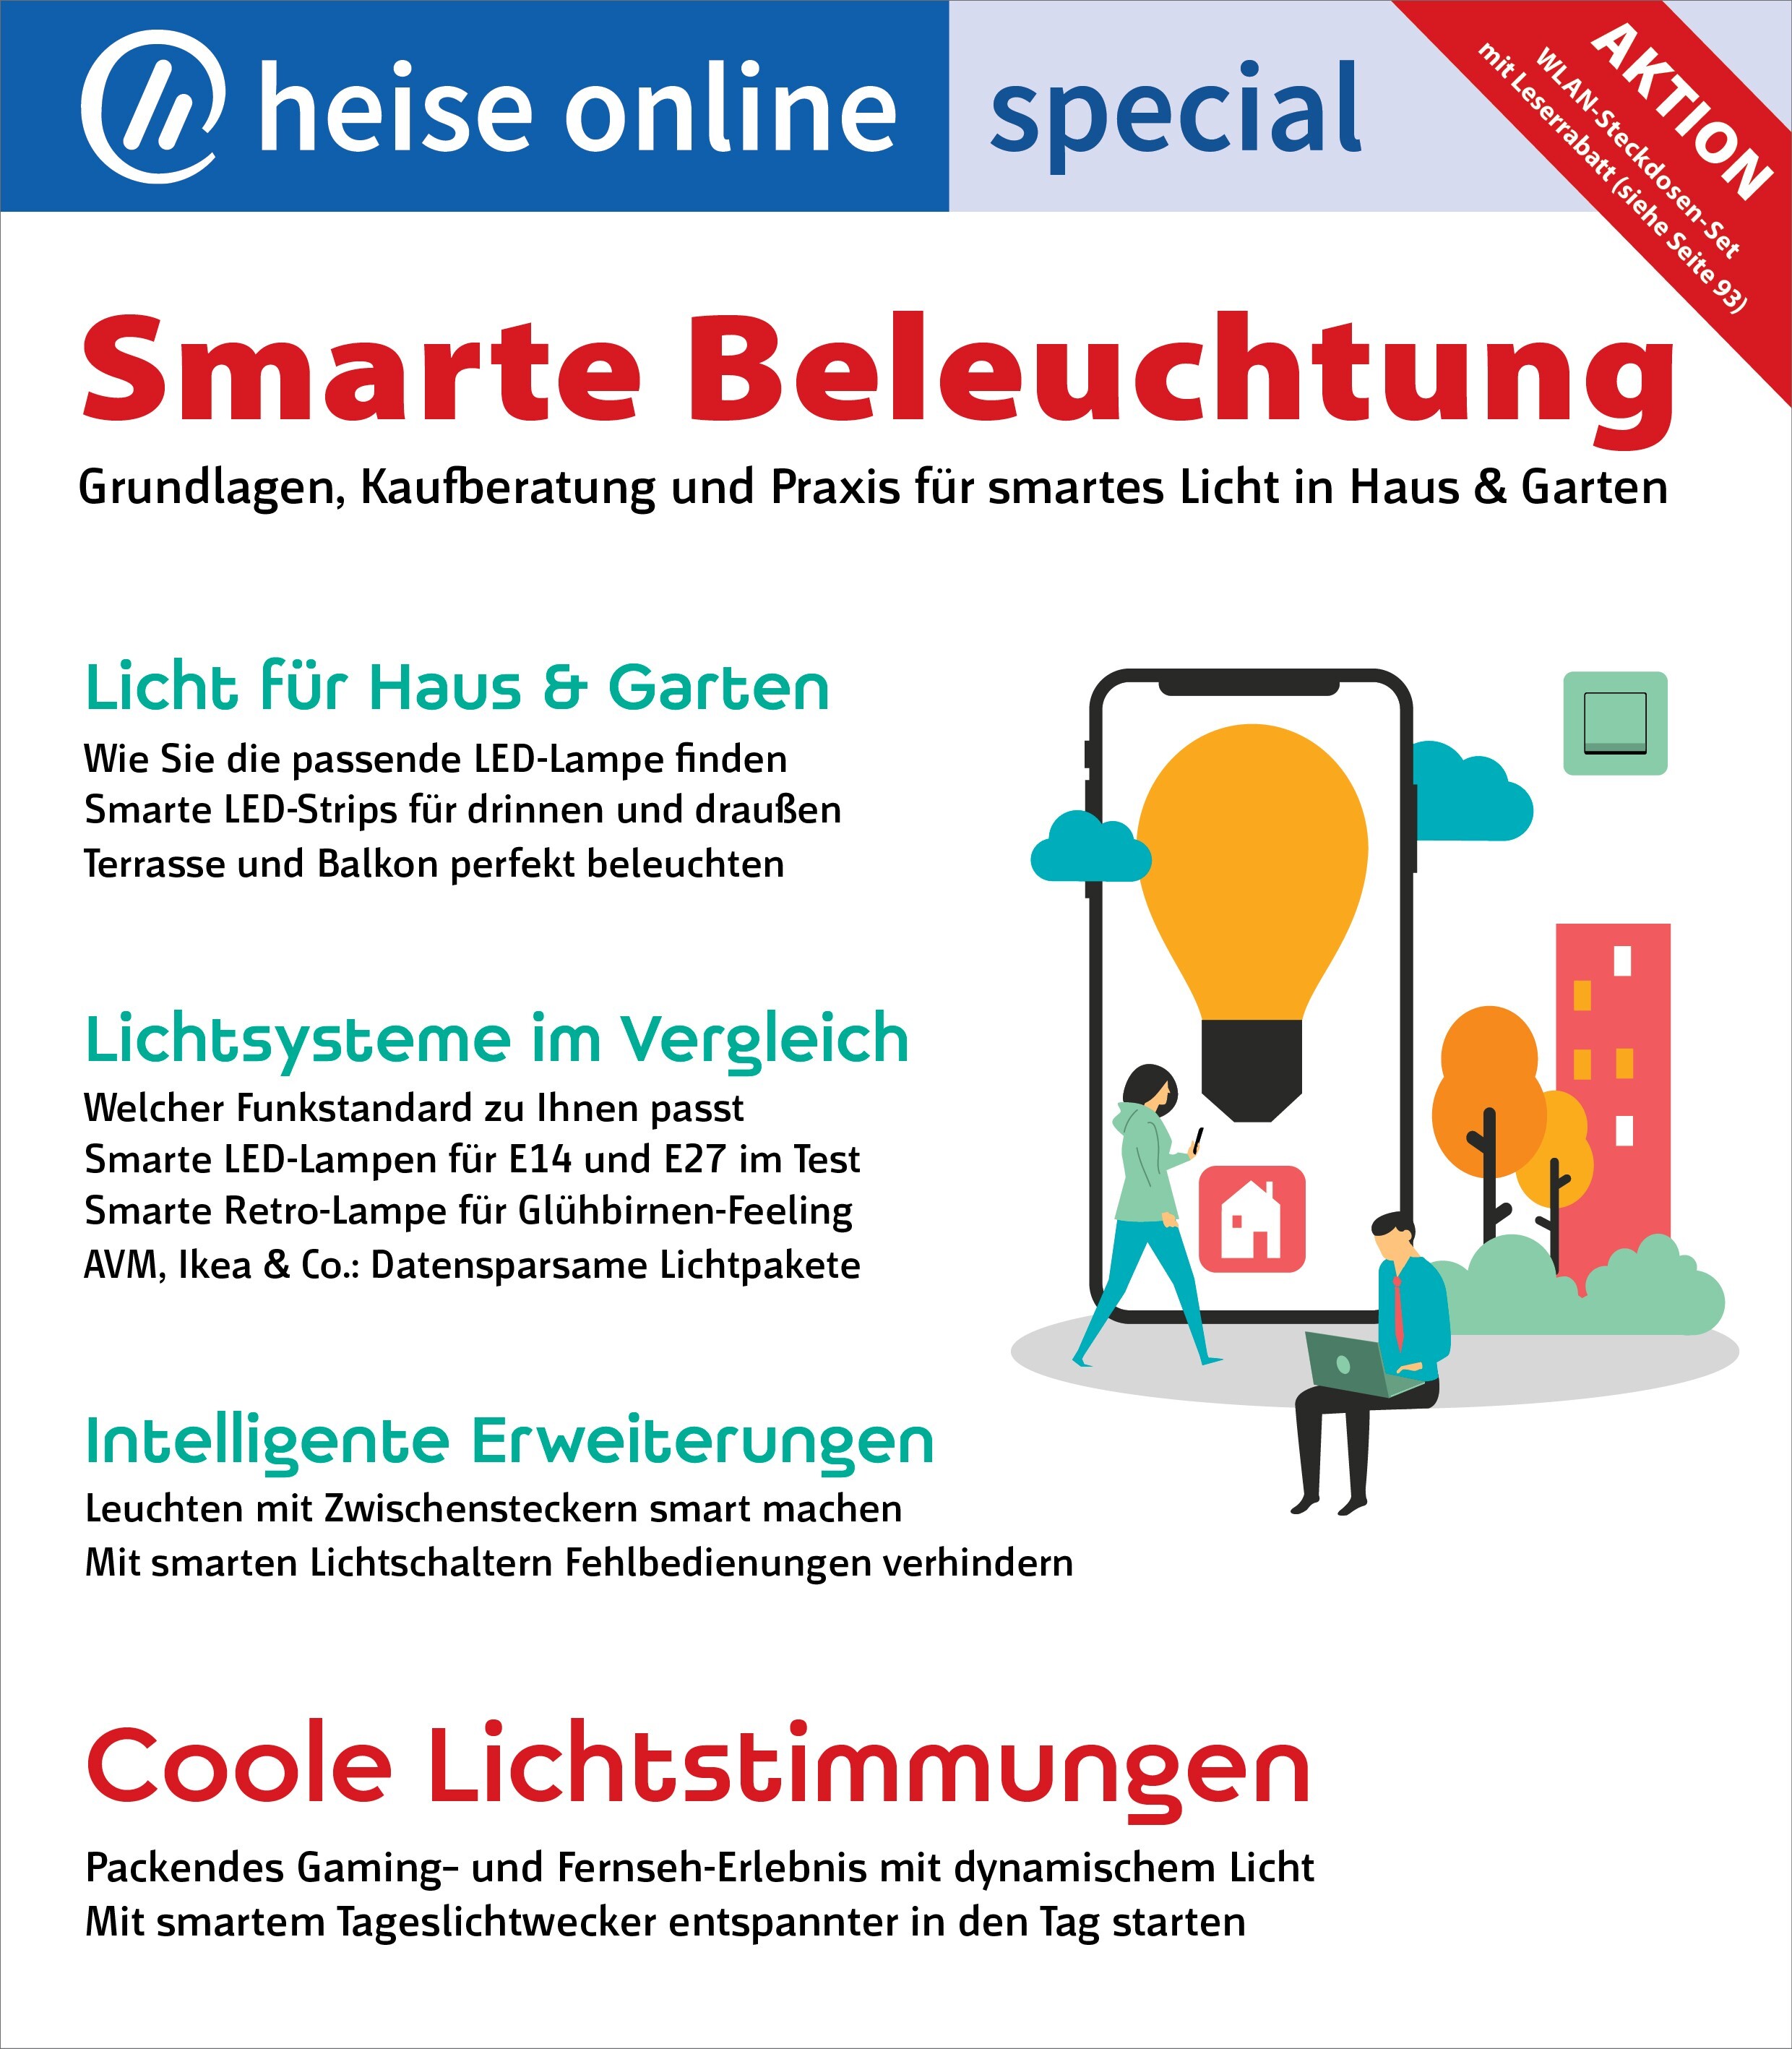 heise online special - Smarte Beleuchtung